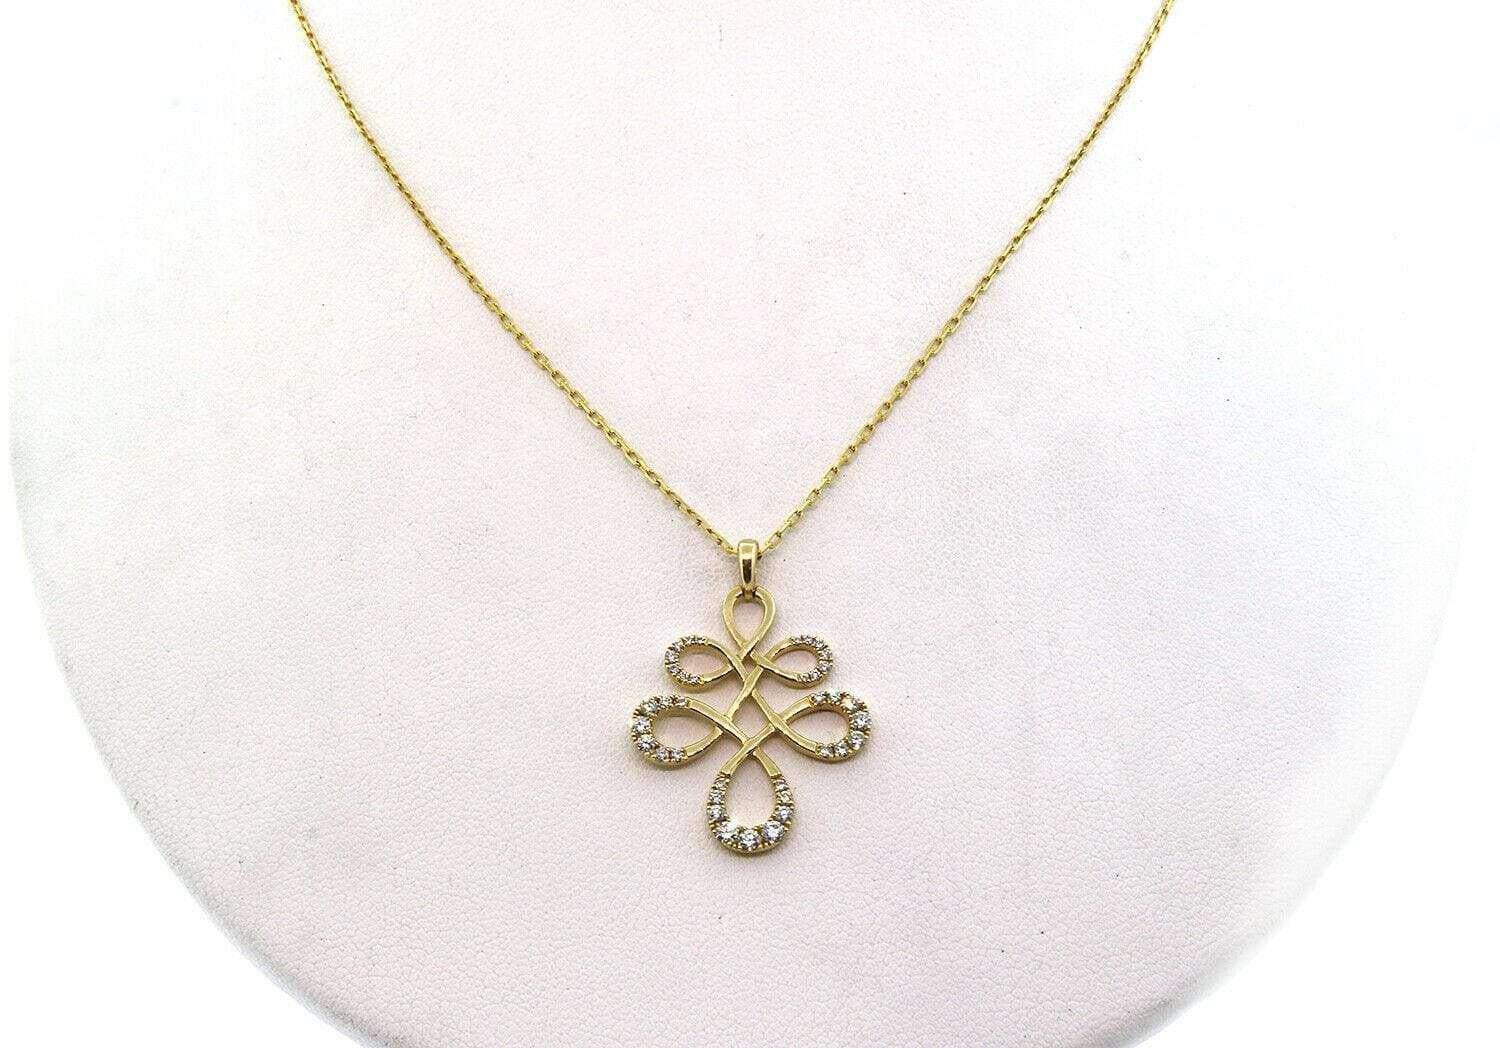 New Frederic Sage Diamond Swirl Pendant Necklace in 14K For Sale 1